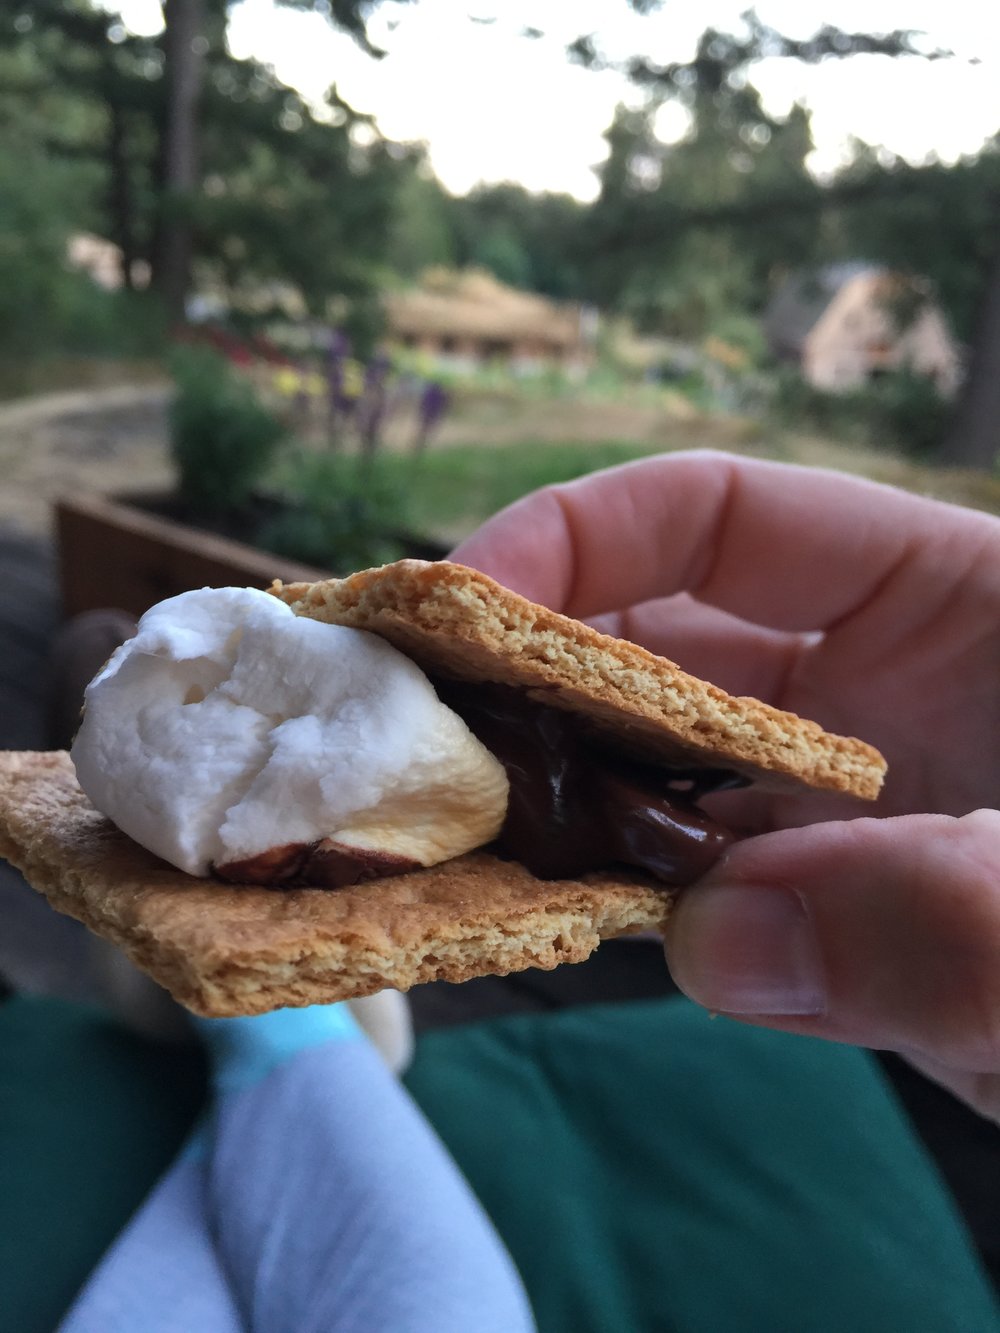 Ahhh S'mores